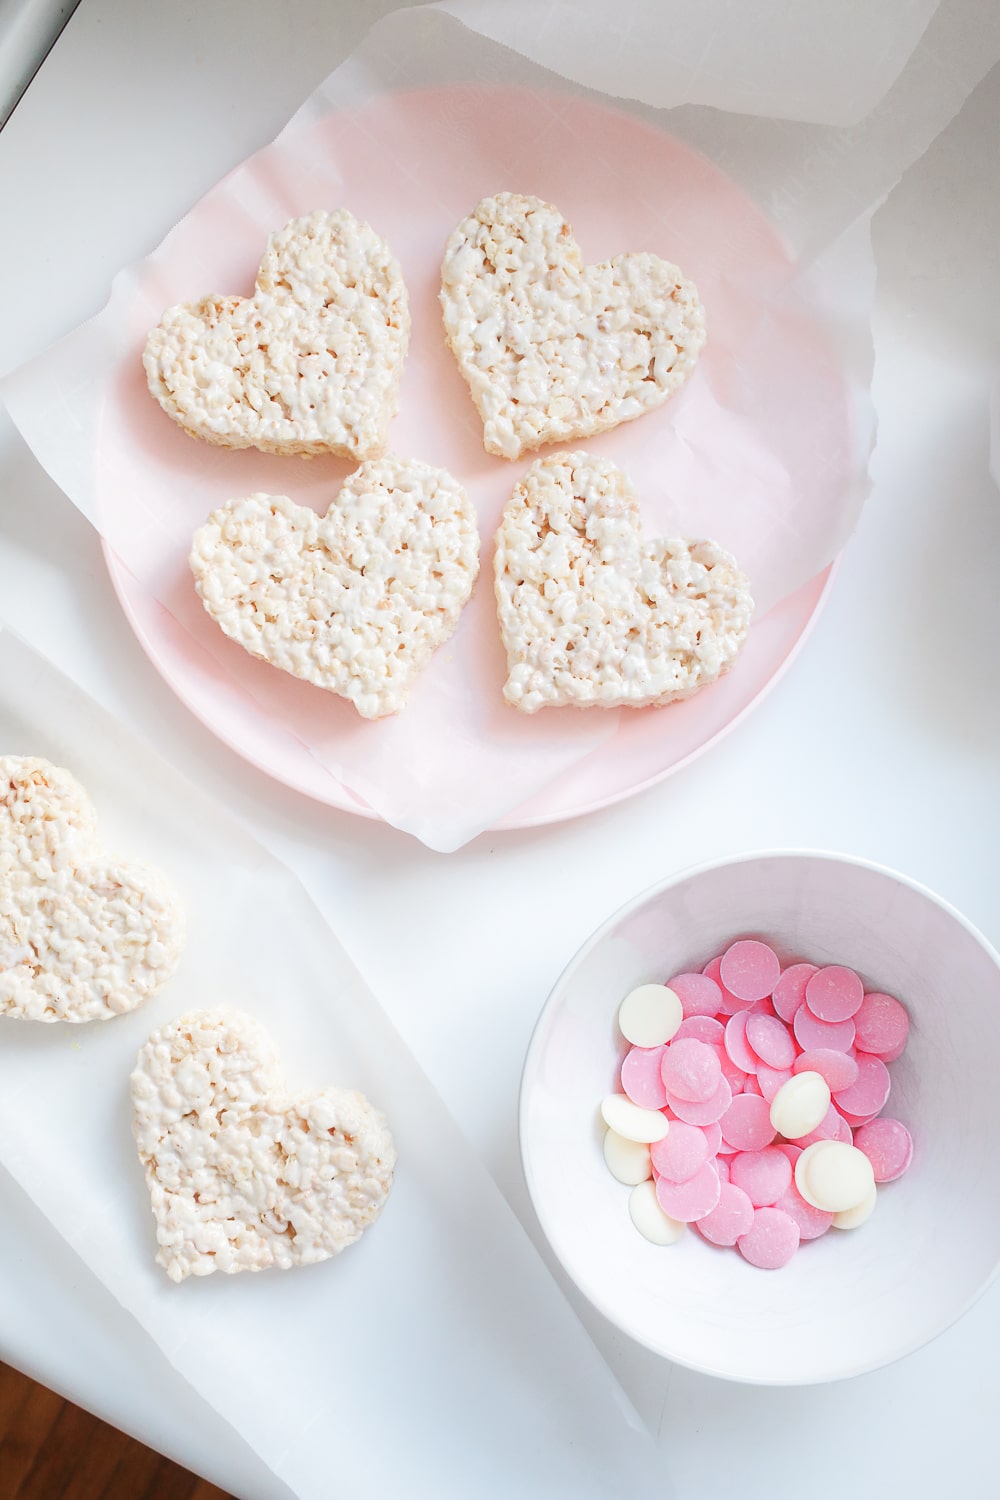 Southern lifestyle blogger Stephanie Ziajka of Diary of a Debutante shows how to use cookie cutters on rice krispie treats for Valentine's Day